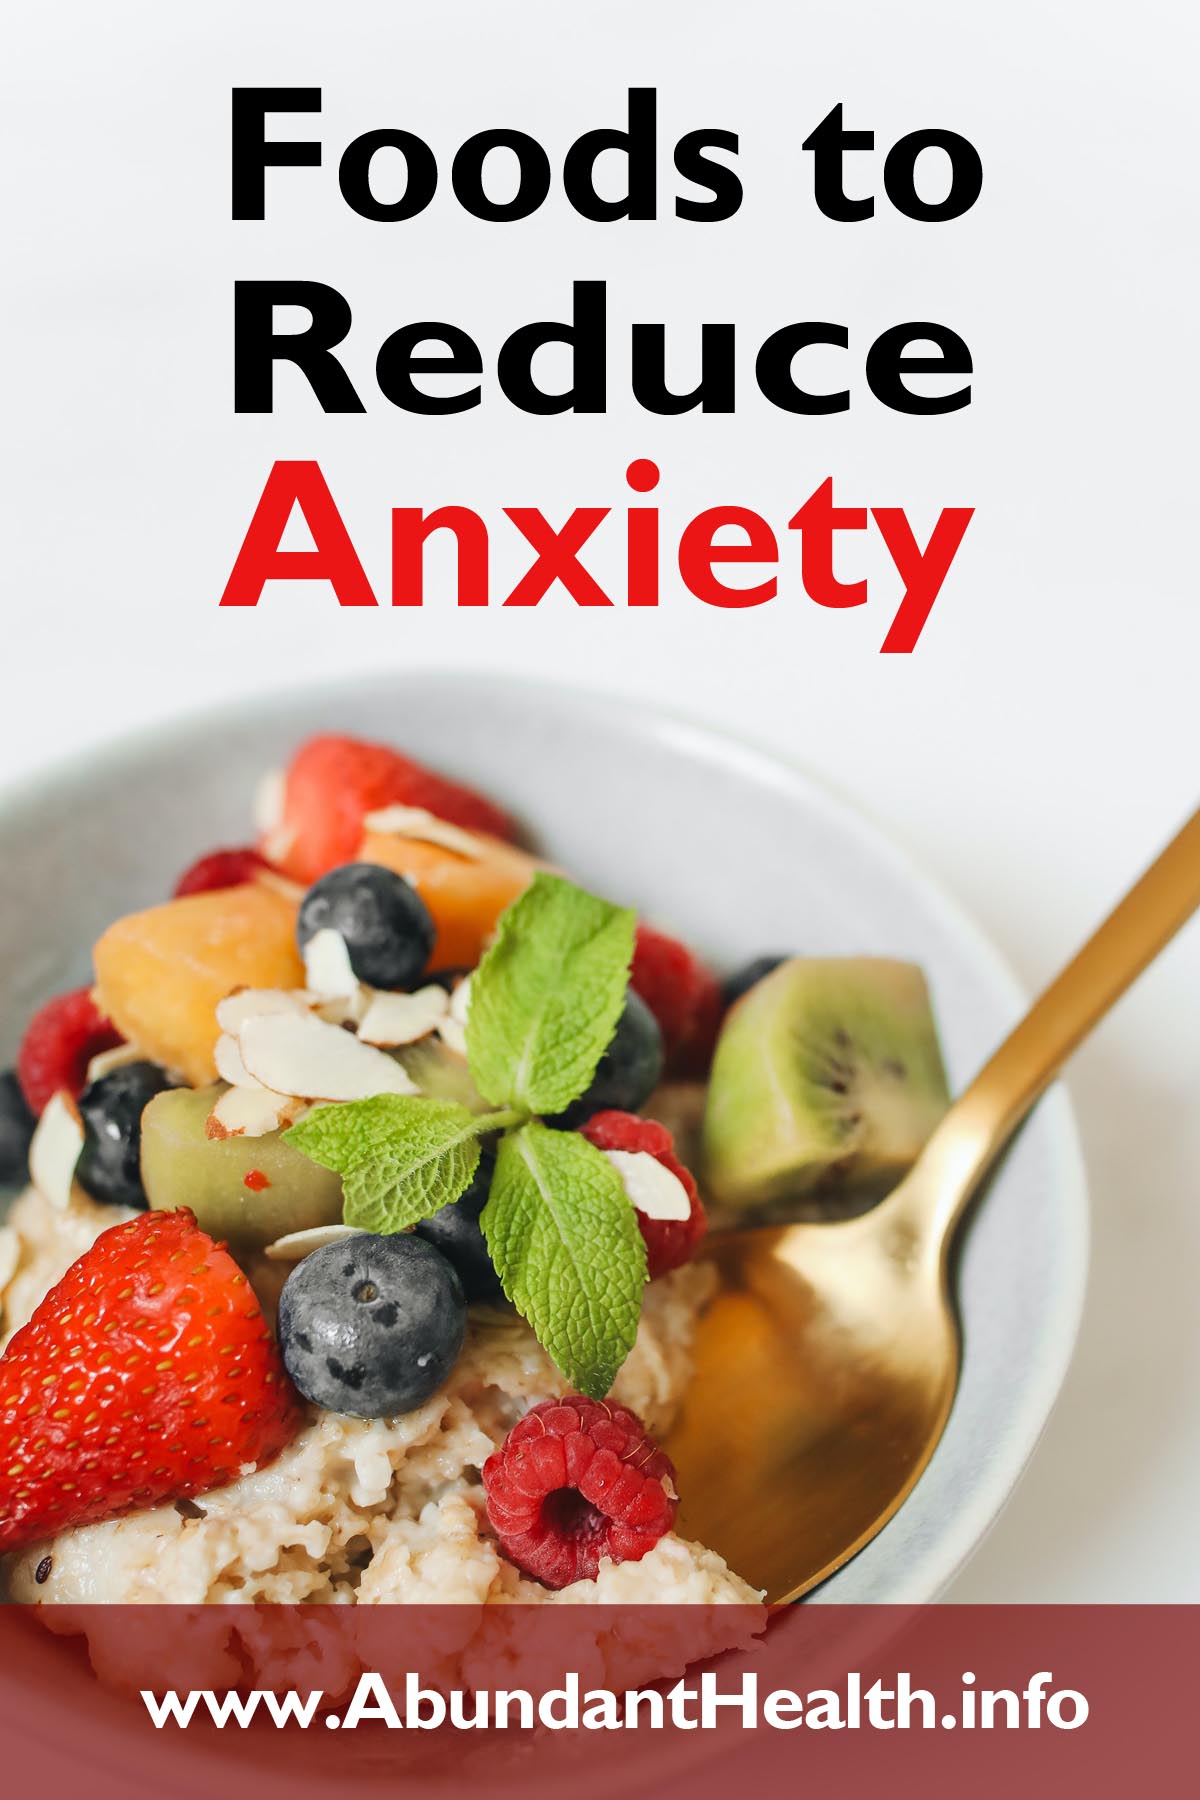 Foods to Reduce Anxiety